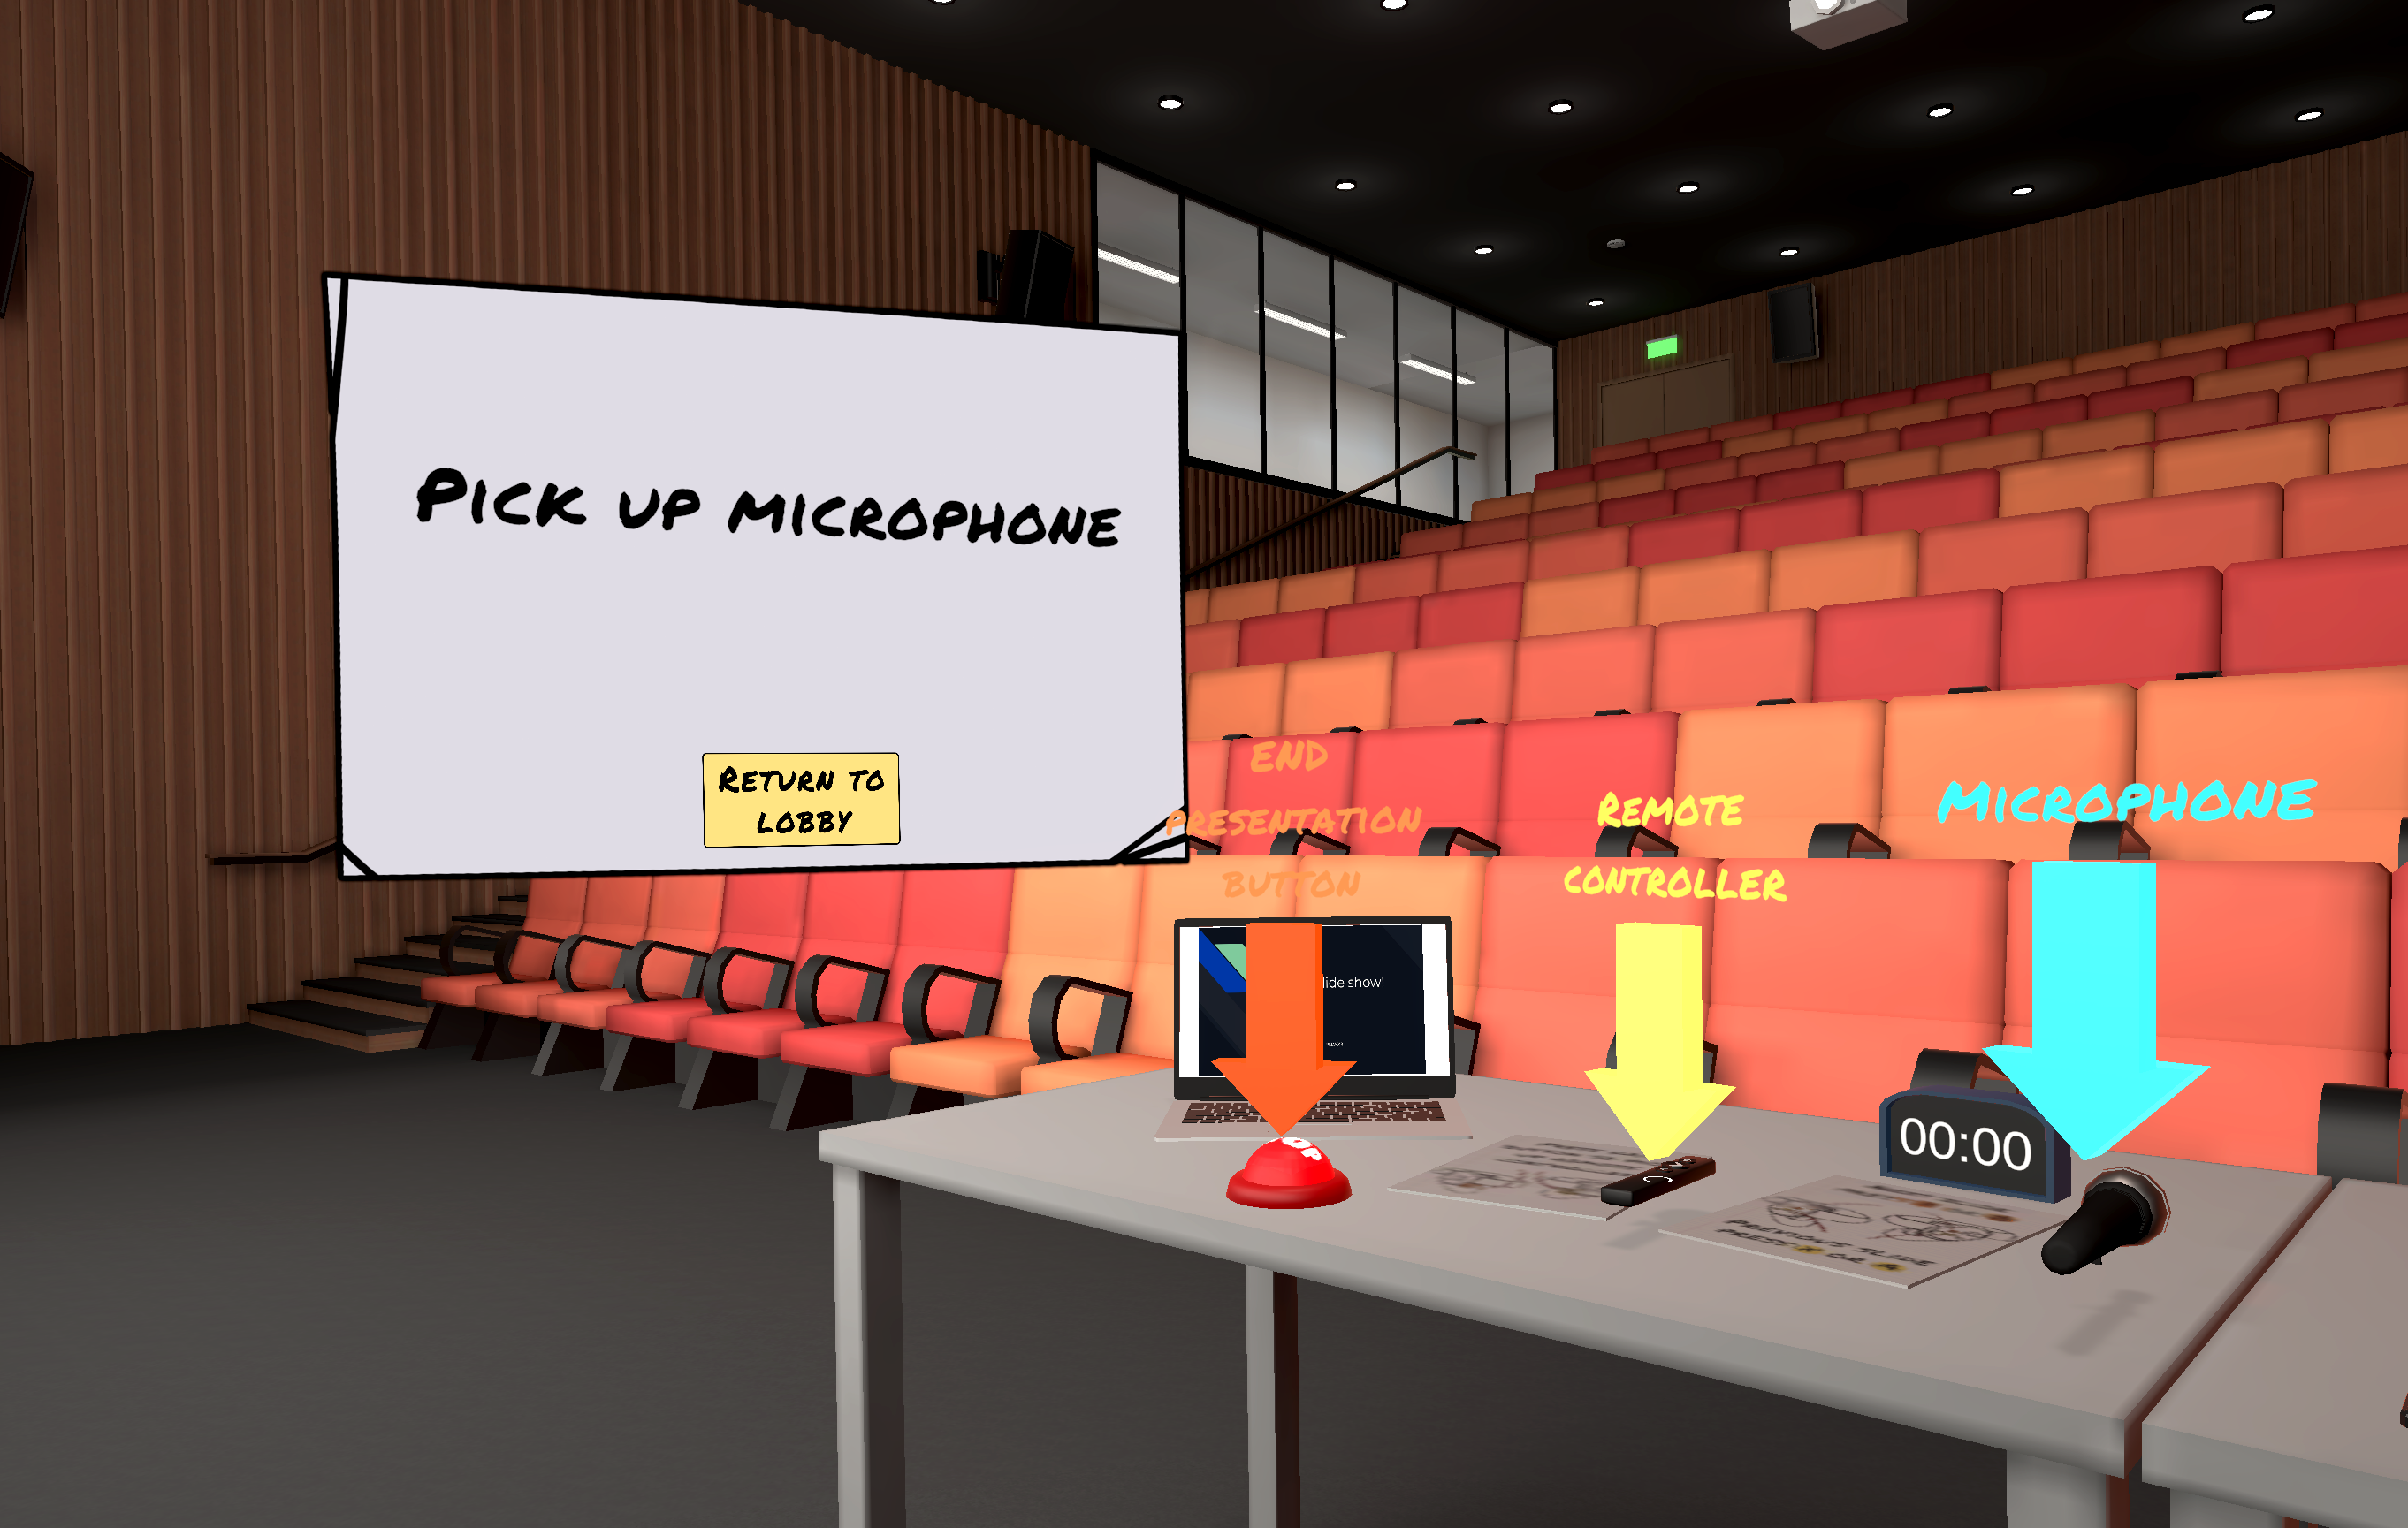 A screenshot of the PedaXR - Presentation Simulation walk-through. There's a note saying that the user should pick up the microphone and arrows with bright colours are showing where the microphone, the remote controller and the "end presentation" button are located on the table.